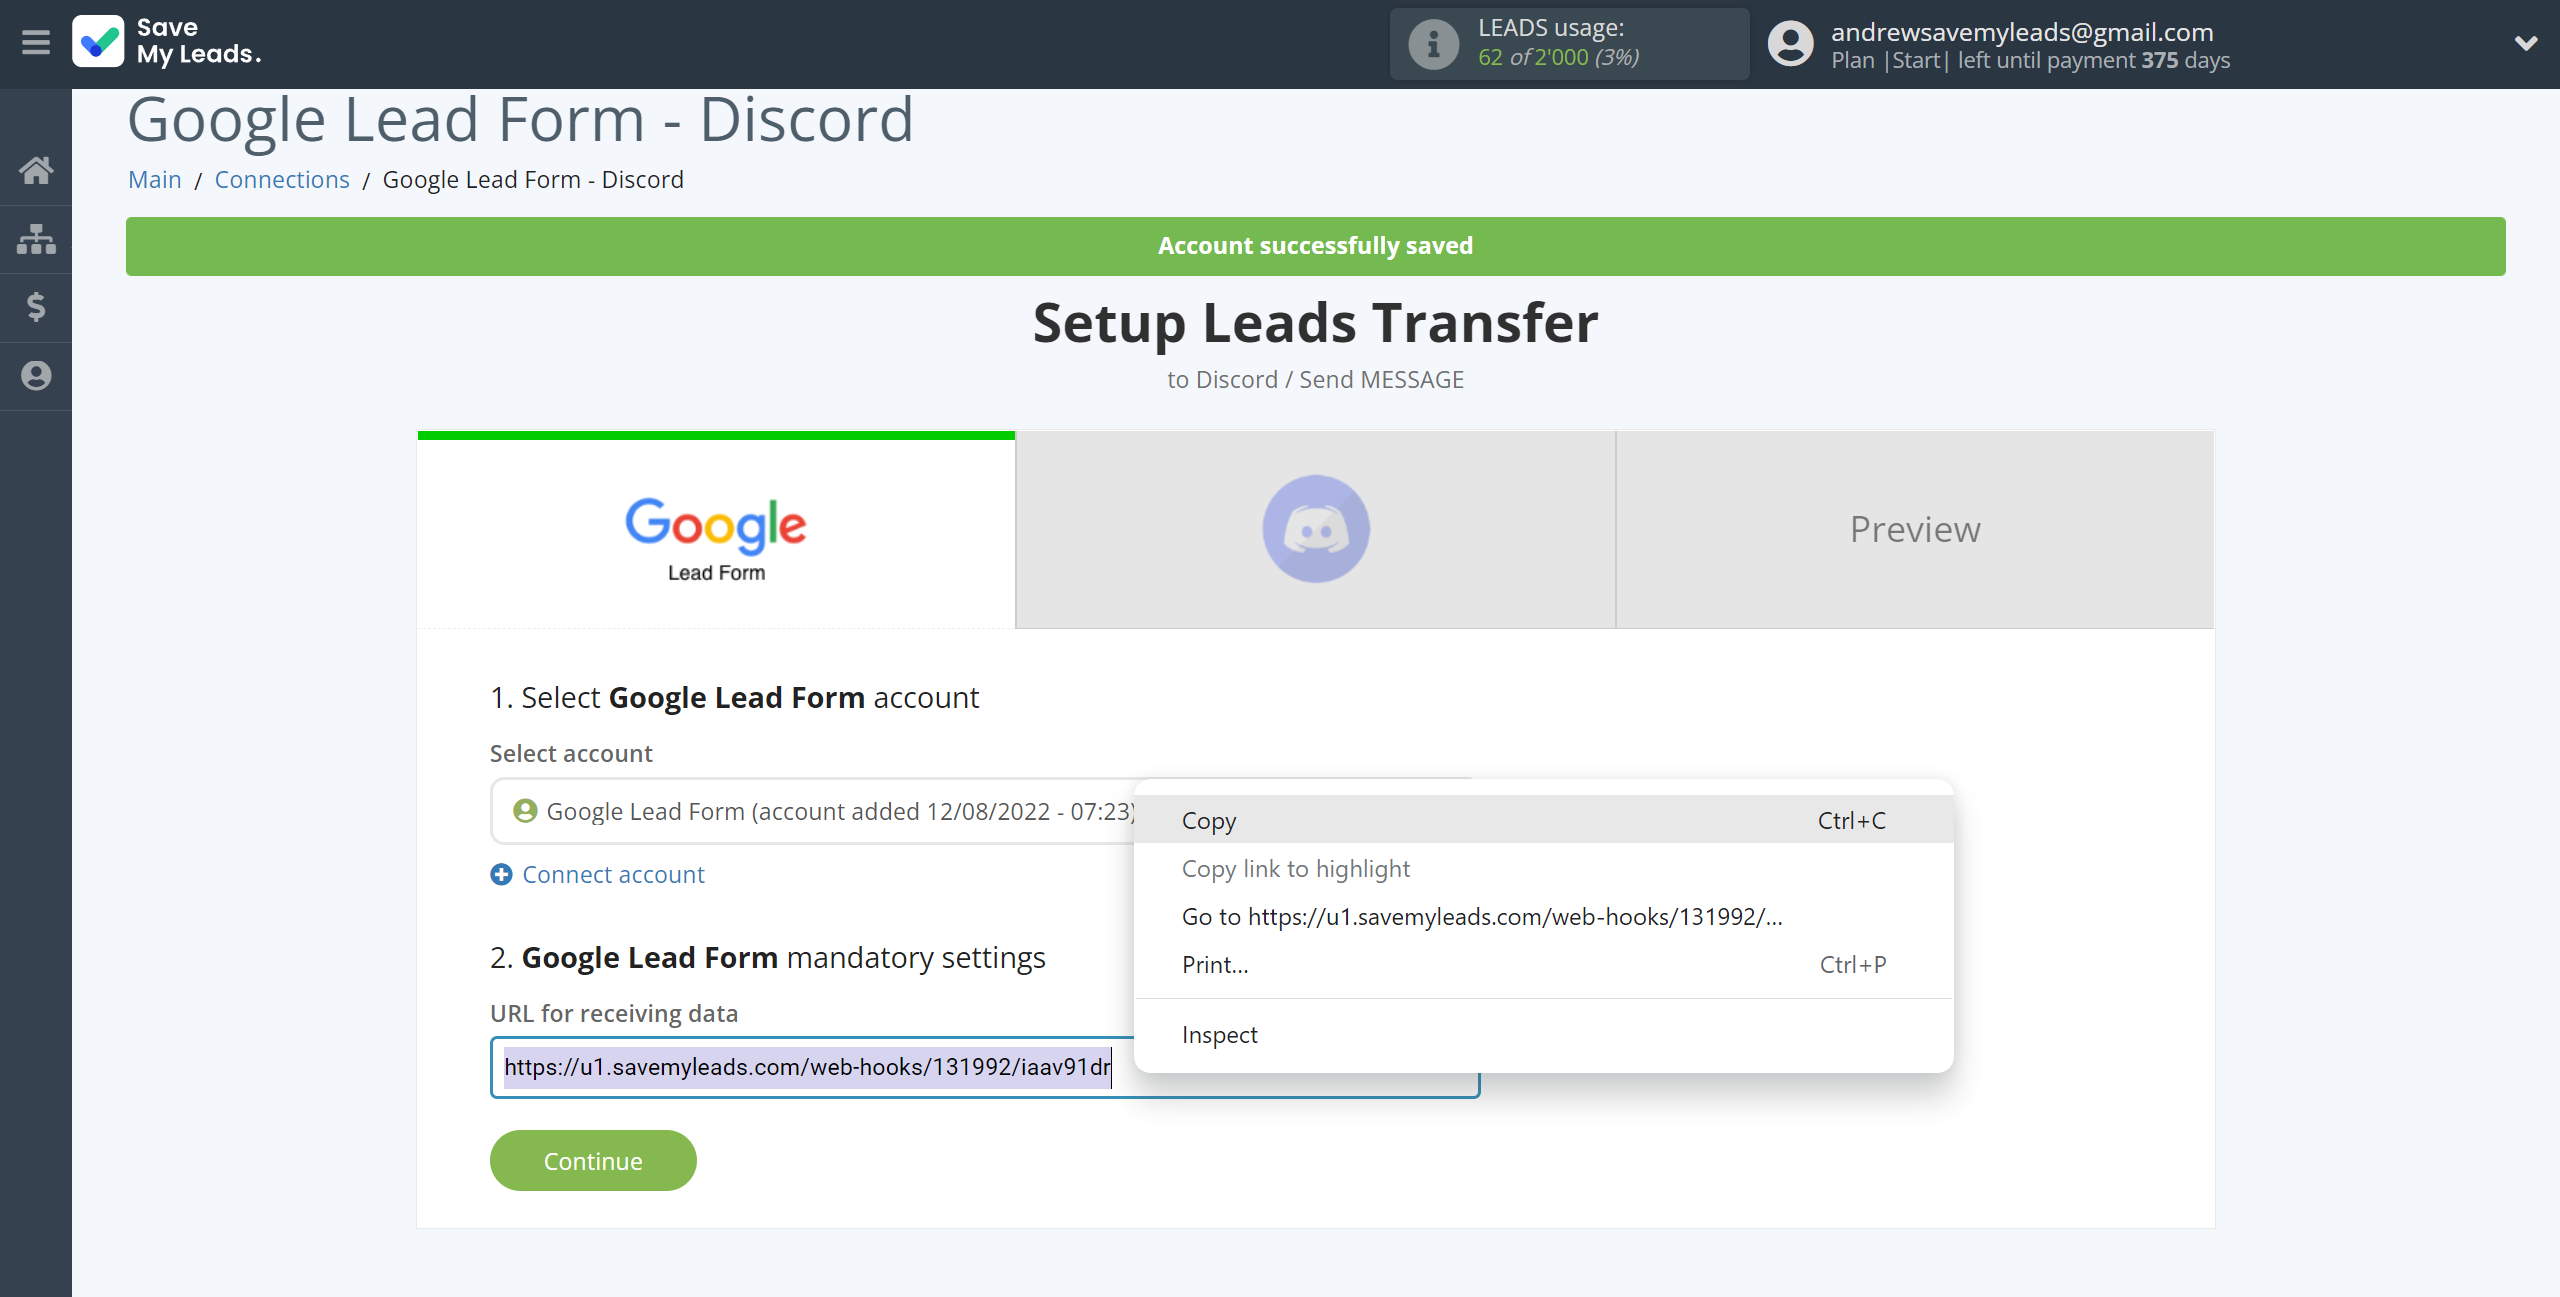 How to Connect Google Lead Form with Discord | Data Source account connection